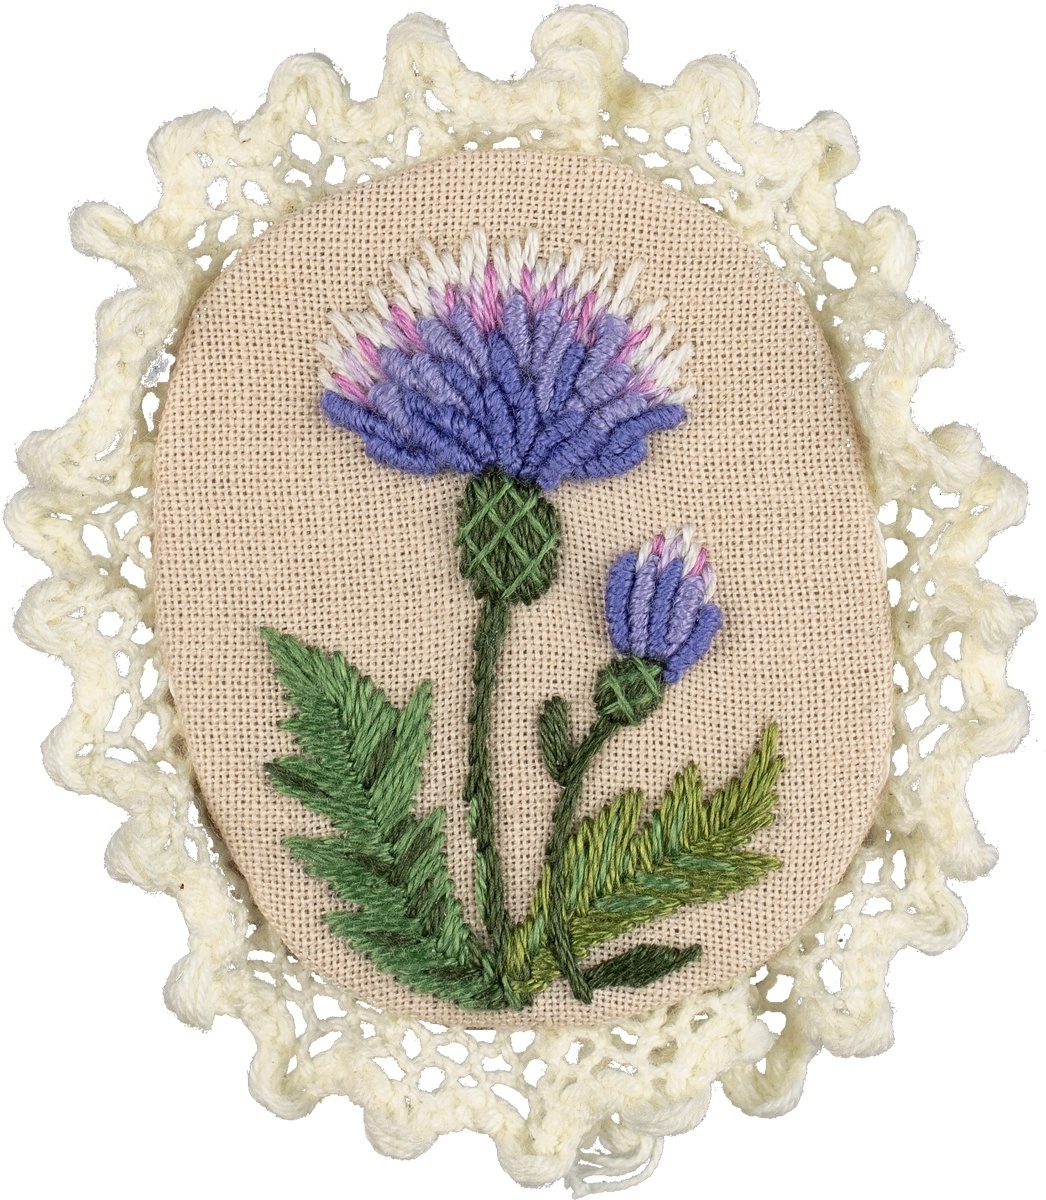 Vintage Brooches. Thistle and Poppy Embroidery Kit фото 6